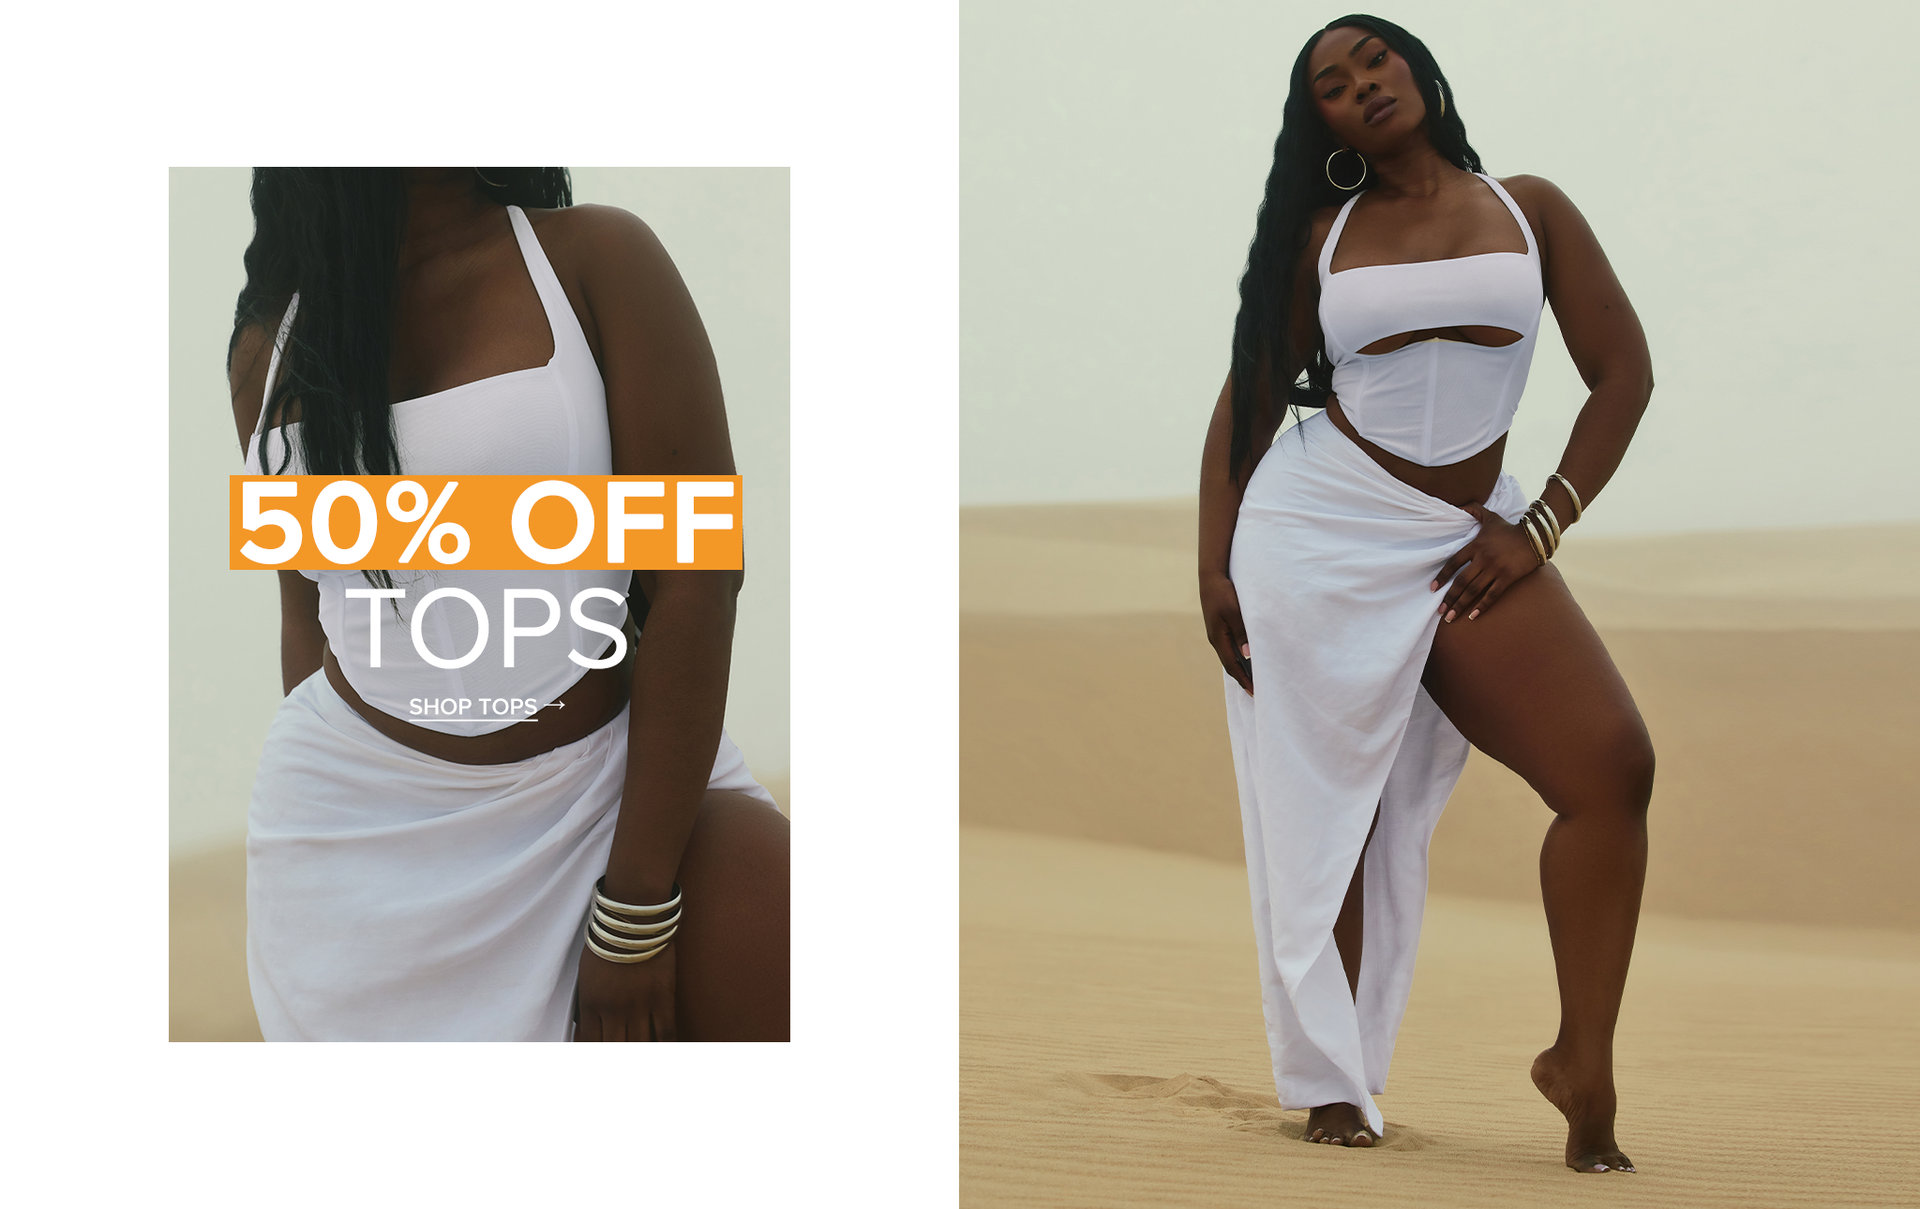 50% OFF TOPS - 5.15.24 - CURVE BANNER